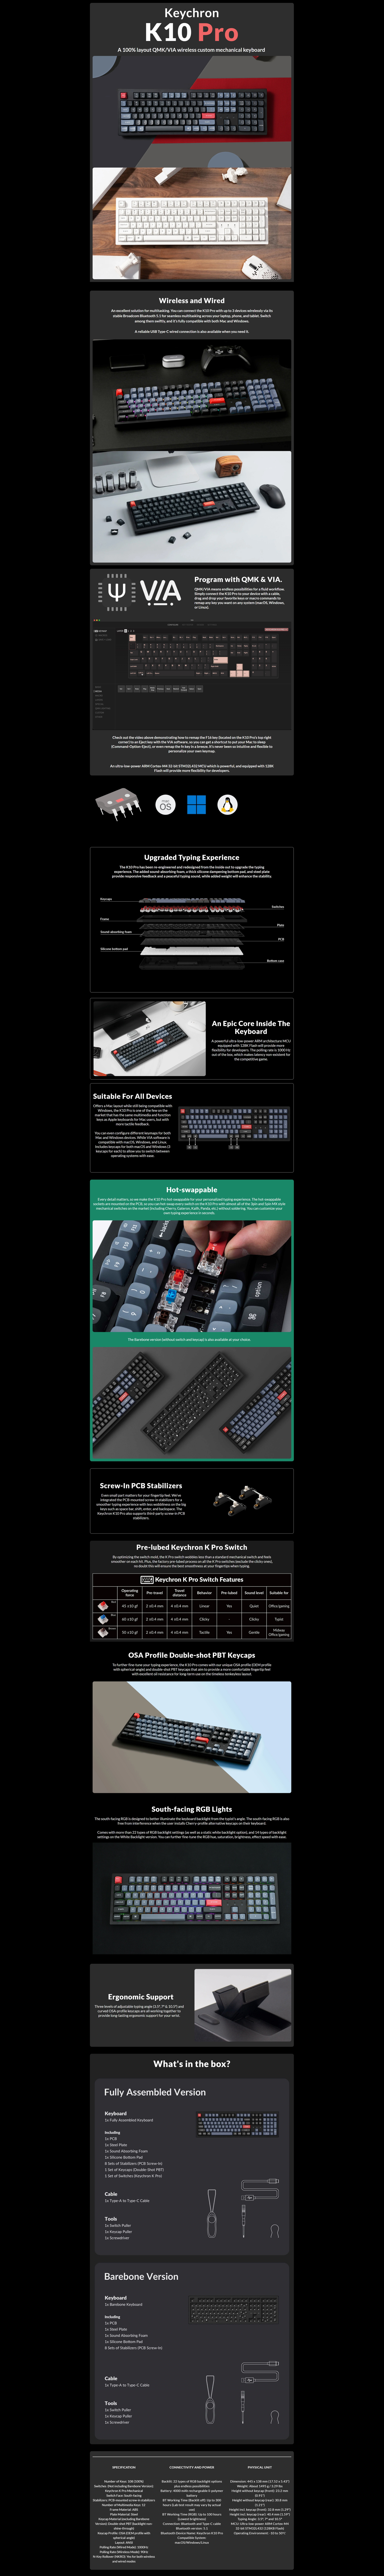 A large marketing image providing additional information about the product Keychron K10 Pro QMK/VIA Wireless Mechanical Keyboard Black (Red Switch) - Additional alt info not provided